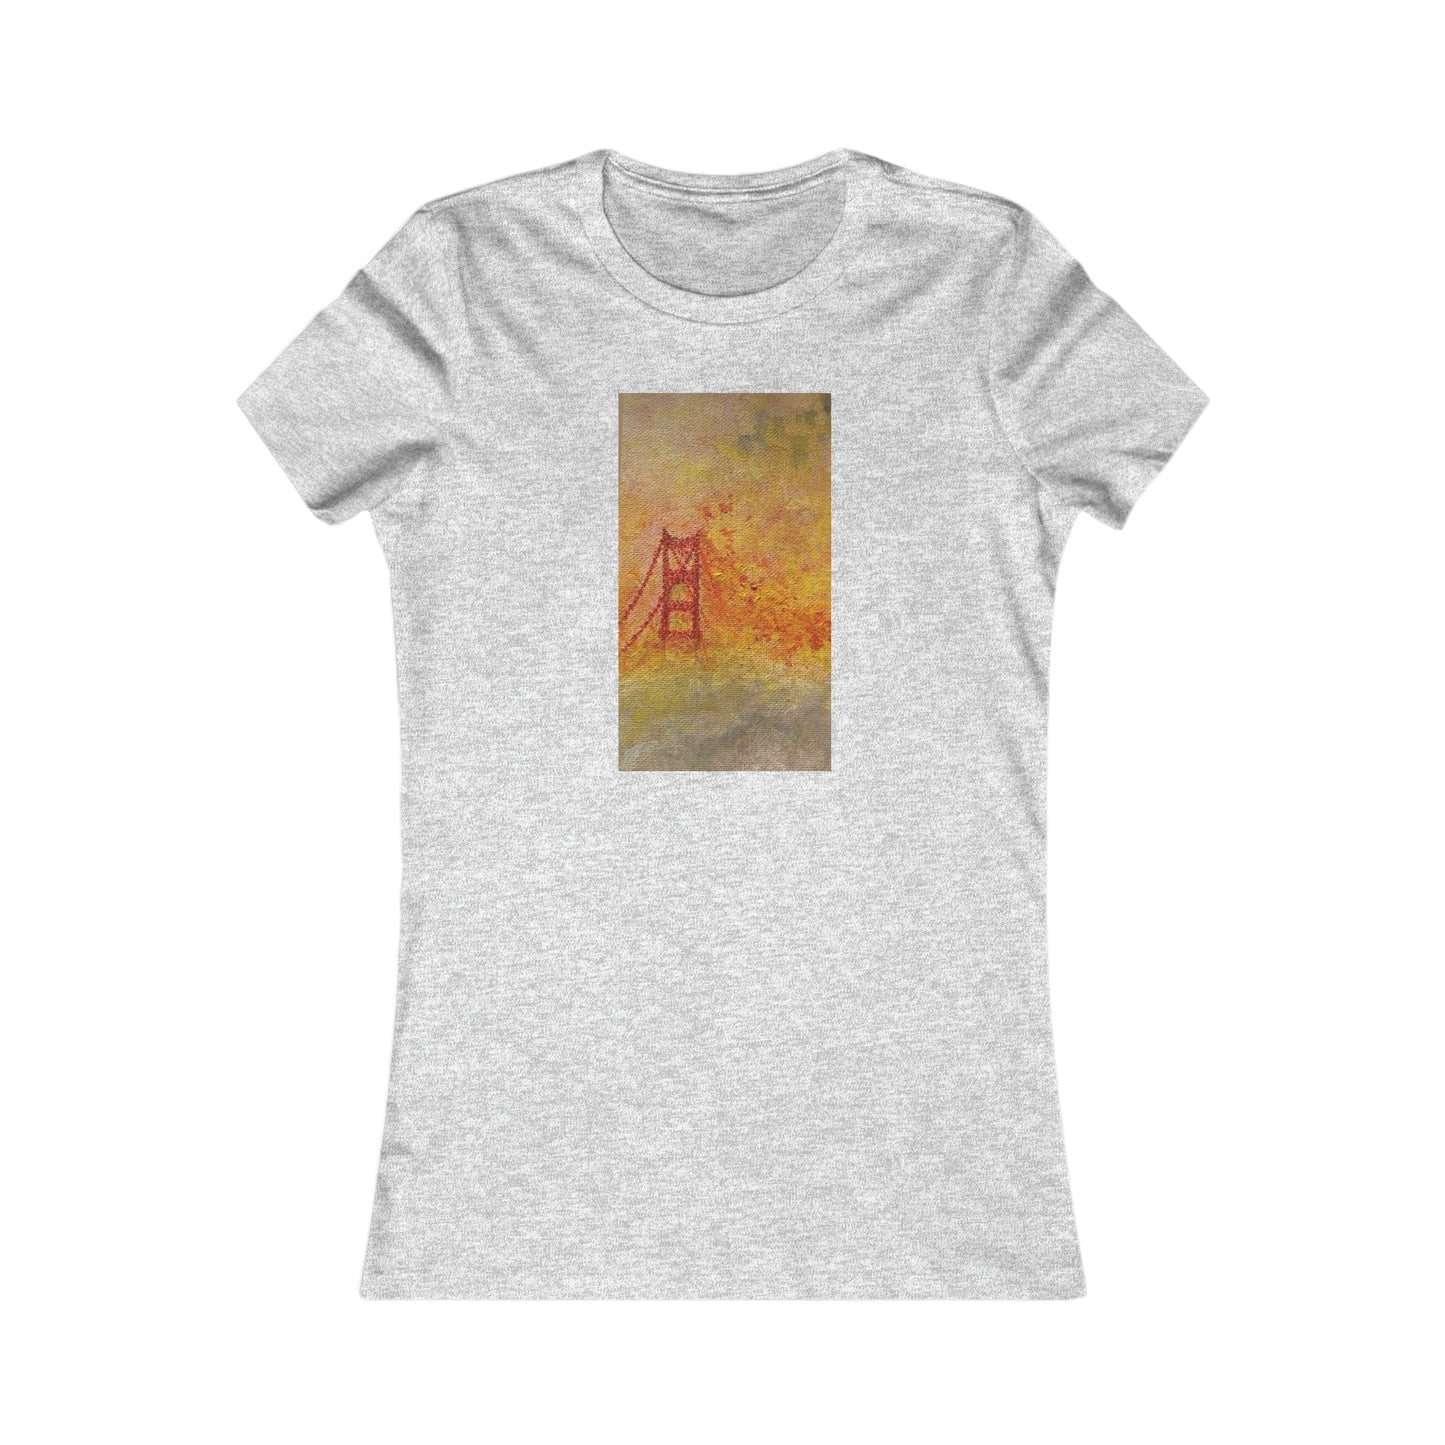 Tipping Points SF Women's Favorite Tee